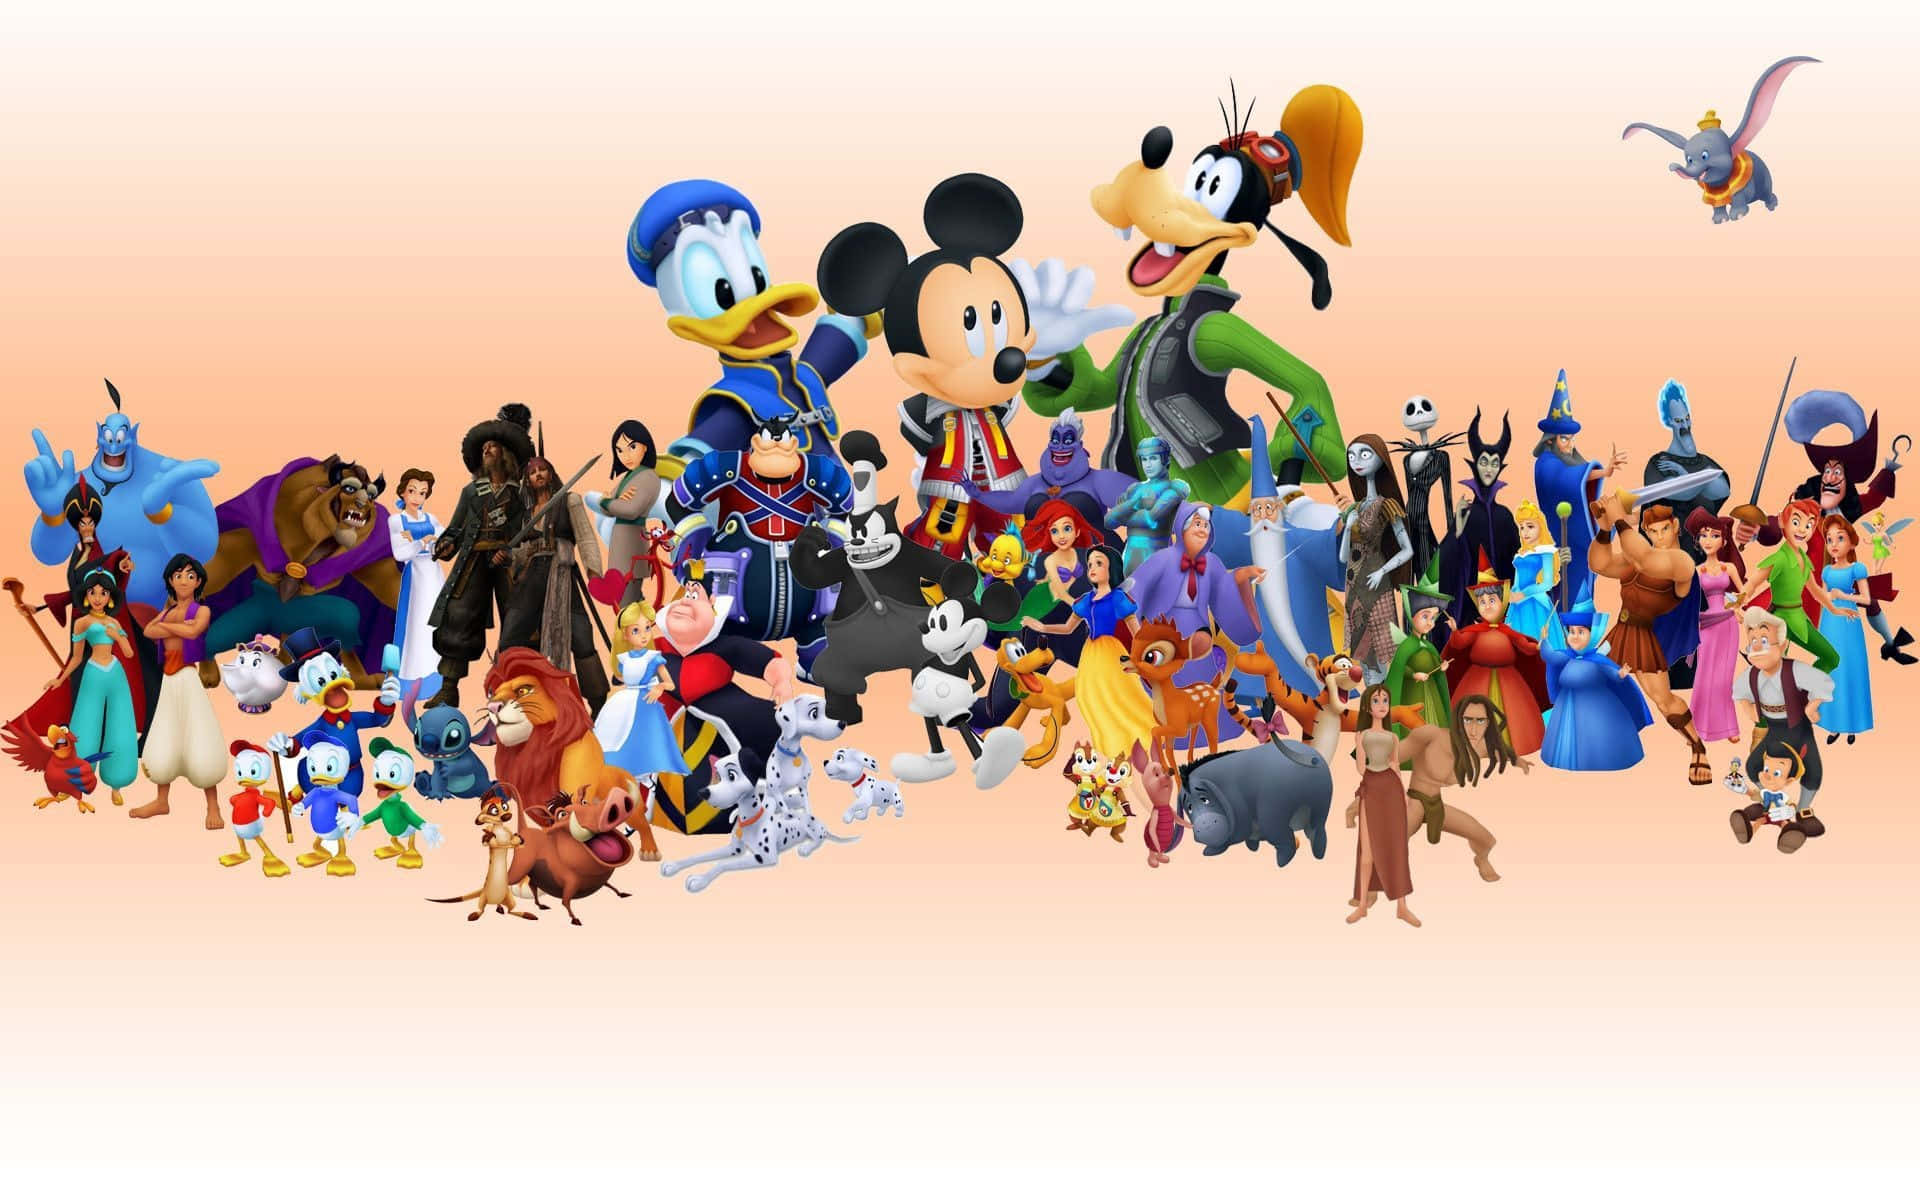 Disney Characters Grouped Together In A Group